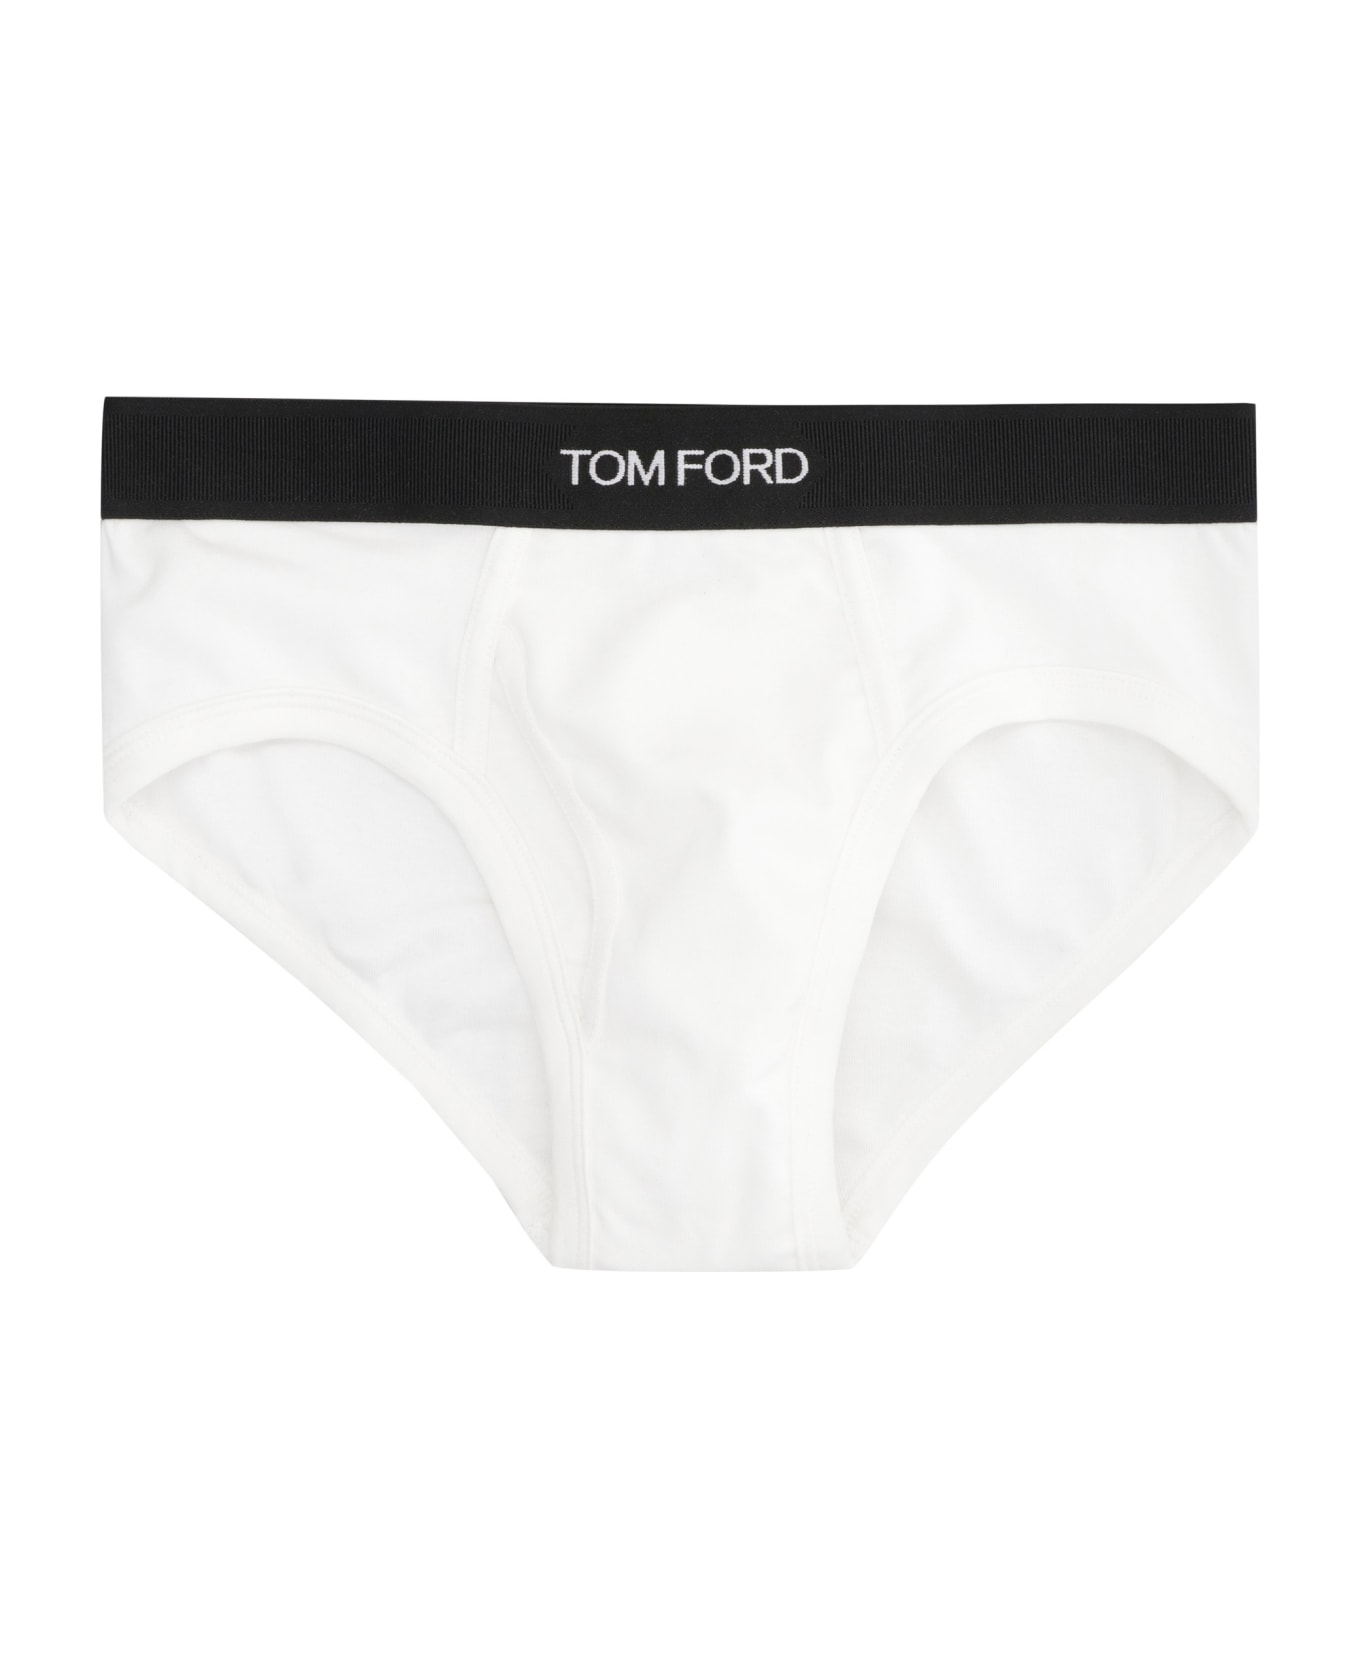 Tom Ford Cotton Briefs With Elastic Band - WHITE